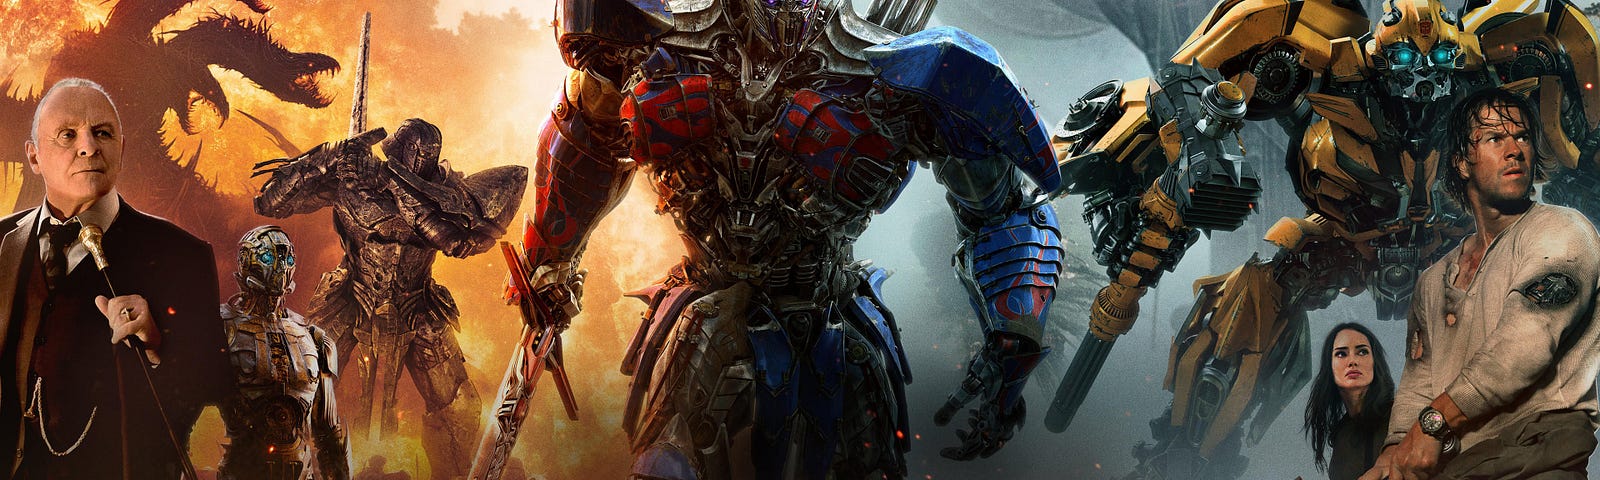 streaming transformers the last knight 2017